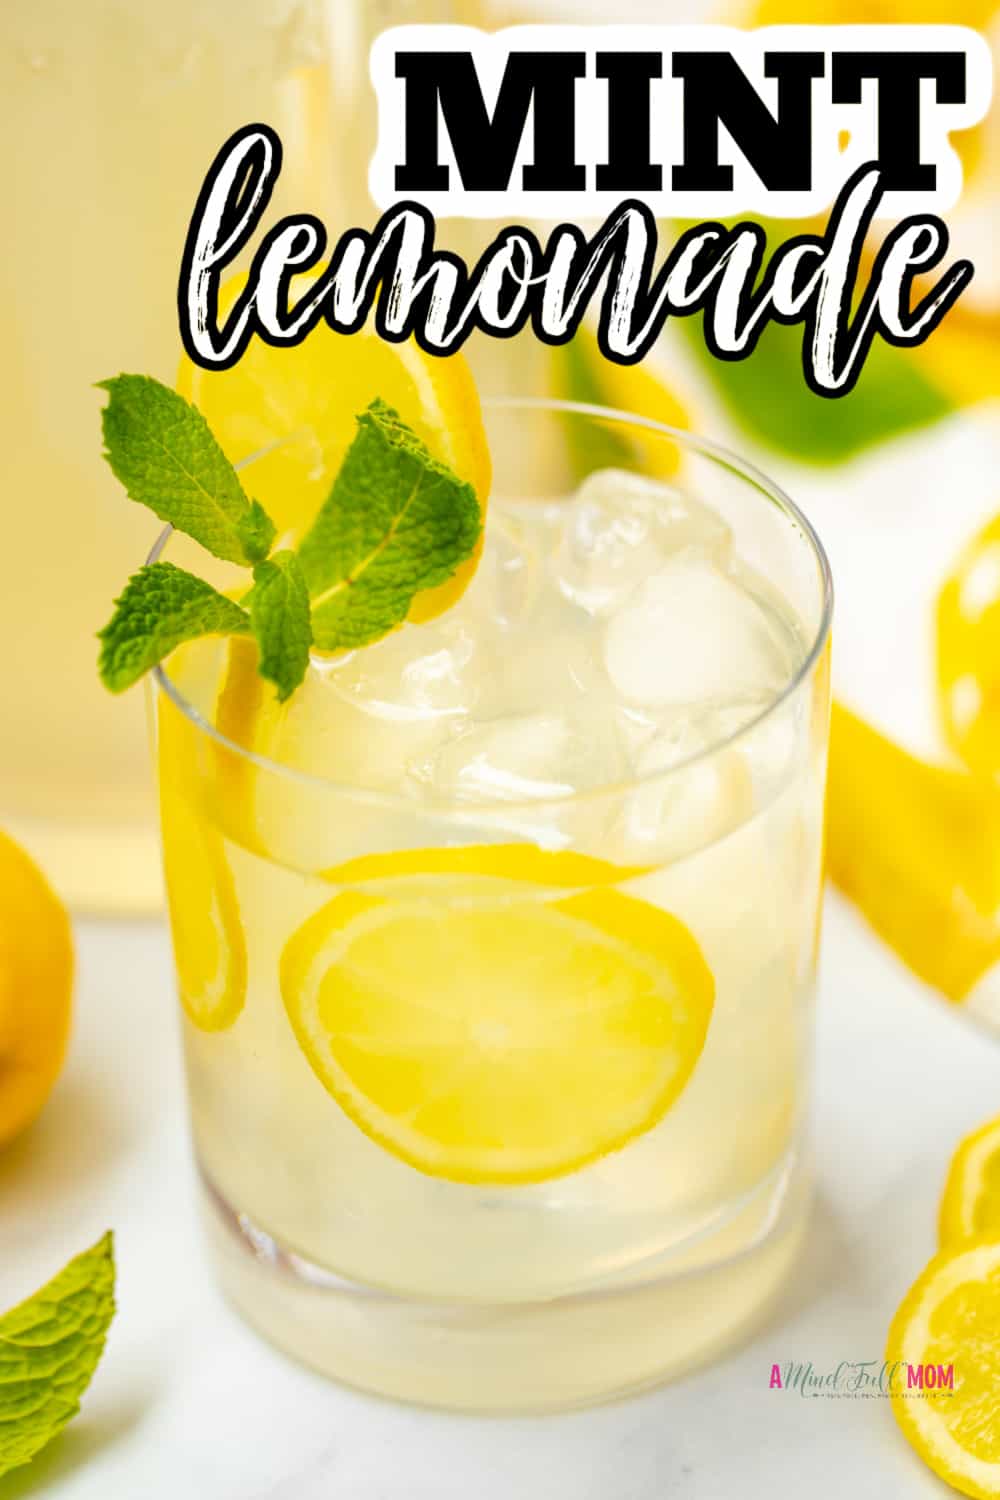 You’ll love this delicious Mint Lemonade Recipe. Made with less sugar than most lemonade recipes, this fresh lemonade is kissed with mint and so refreshing.